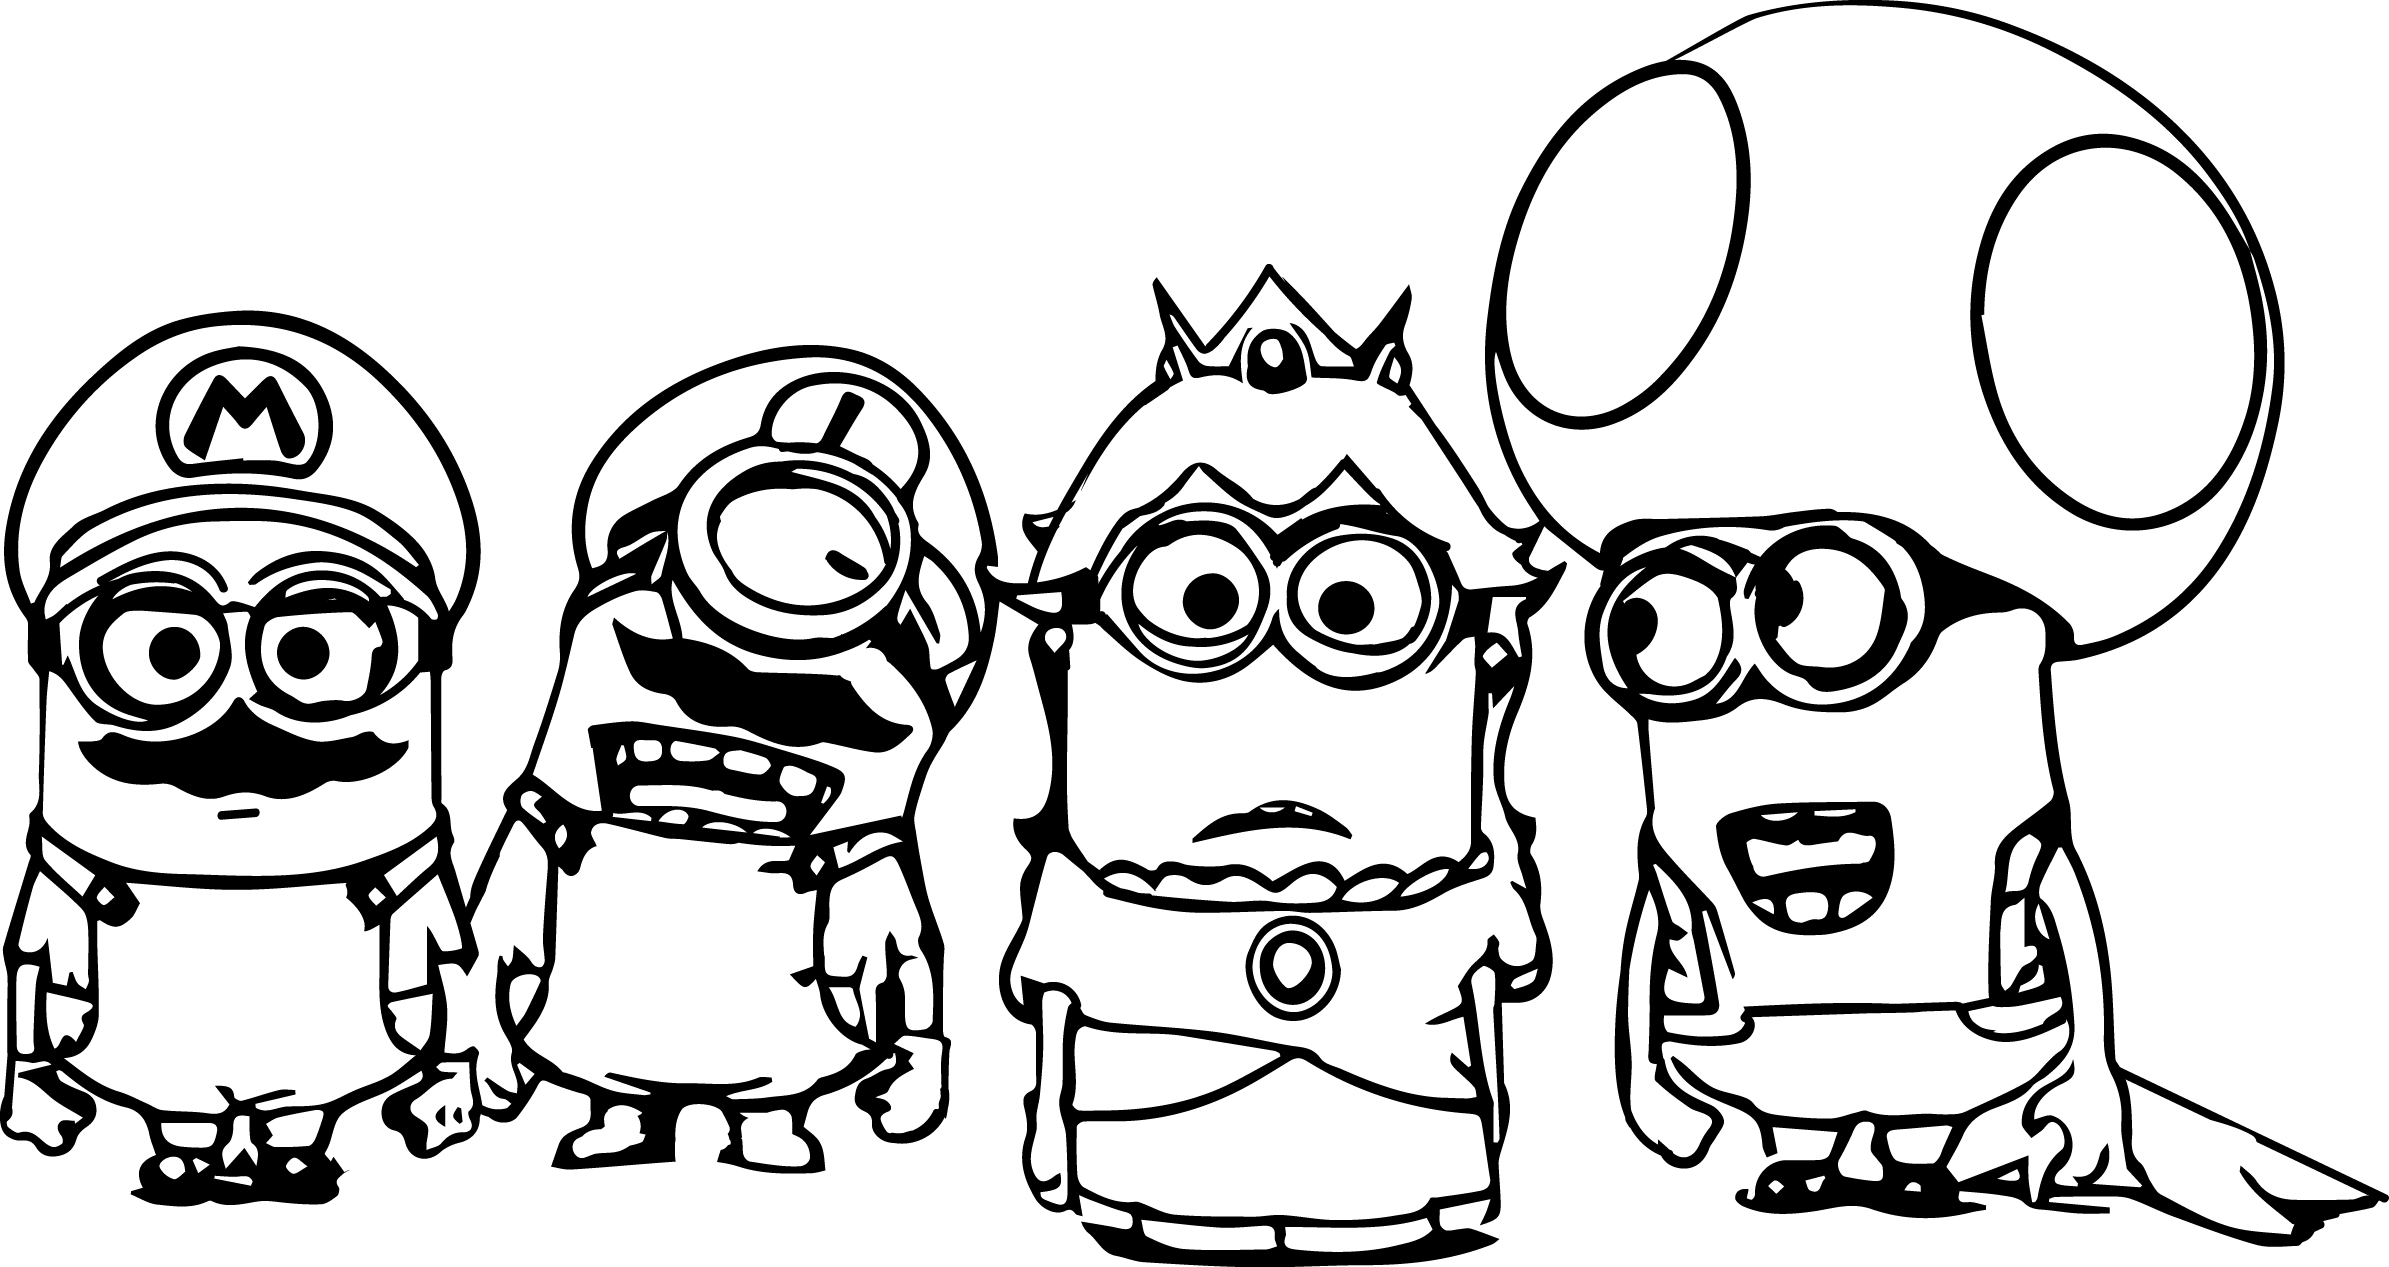 minions coloring minion coloring pages best coloring pages for kids coloring minions 1 5